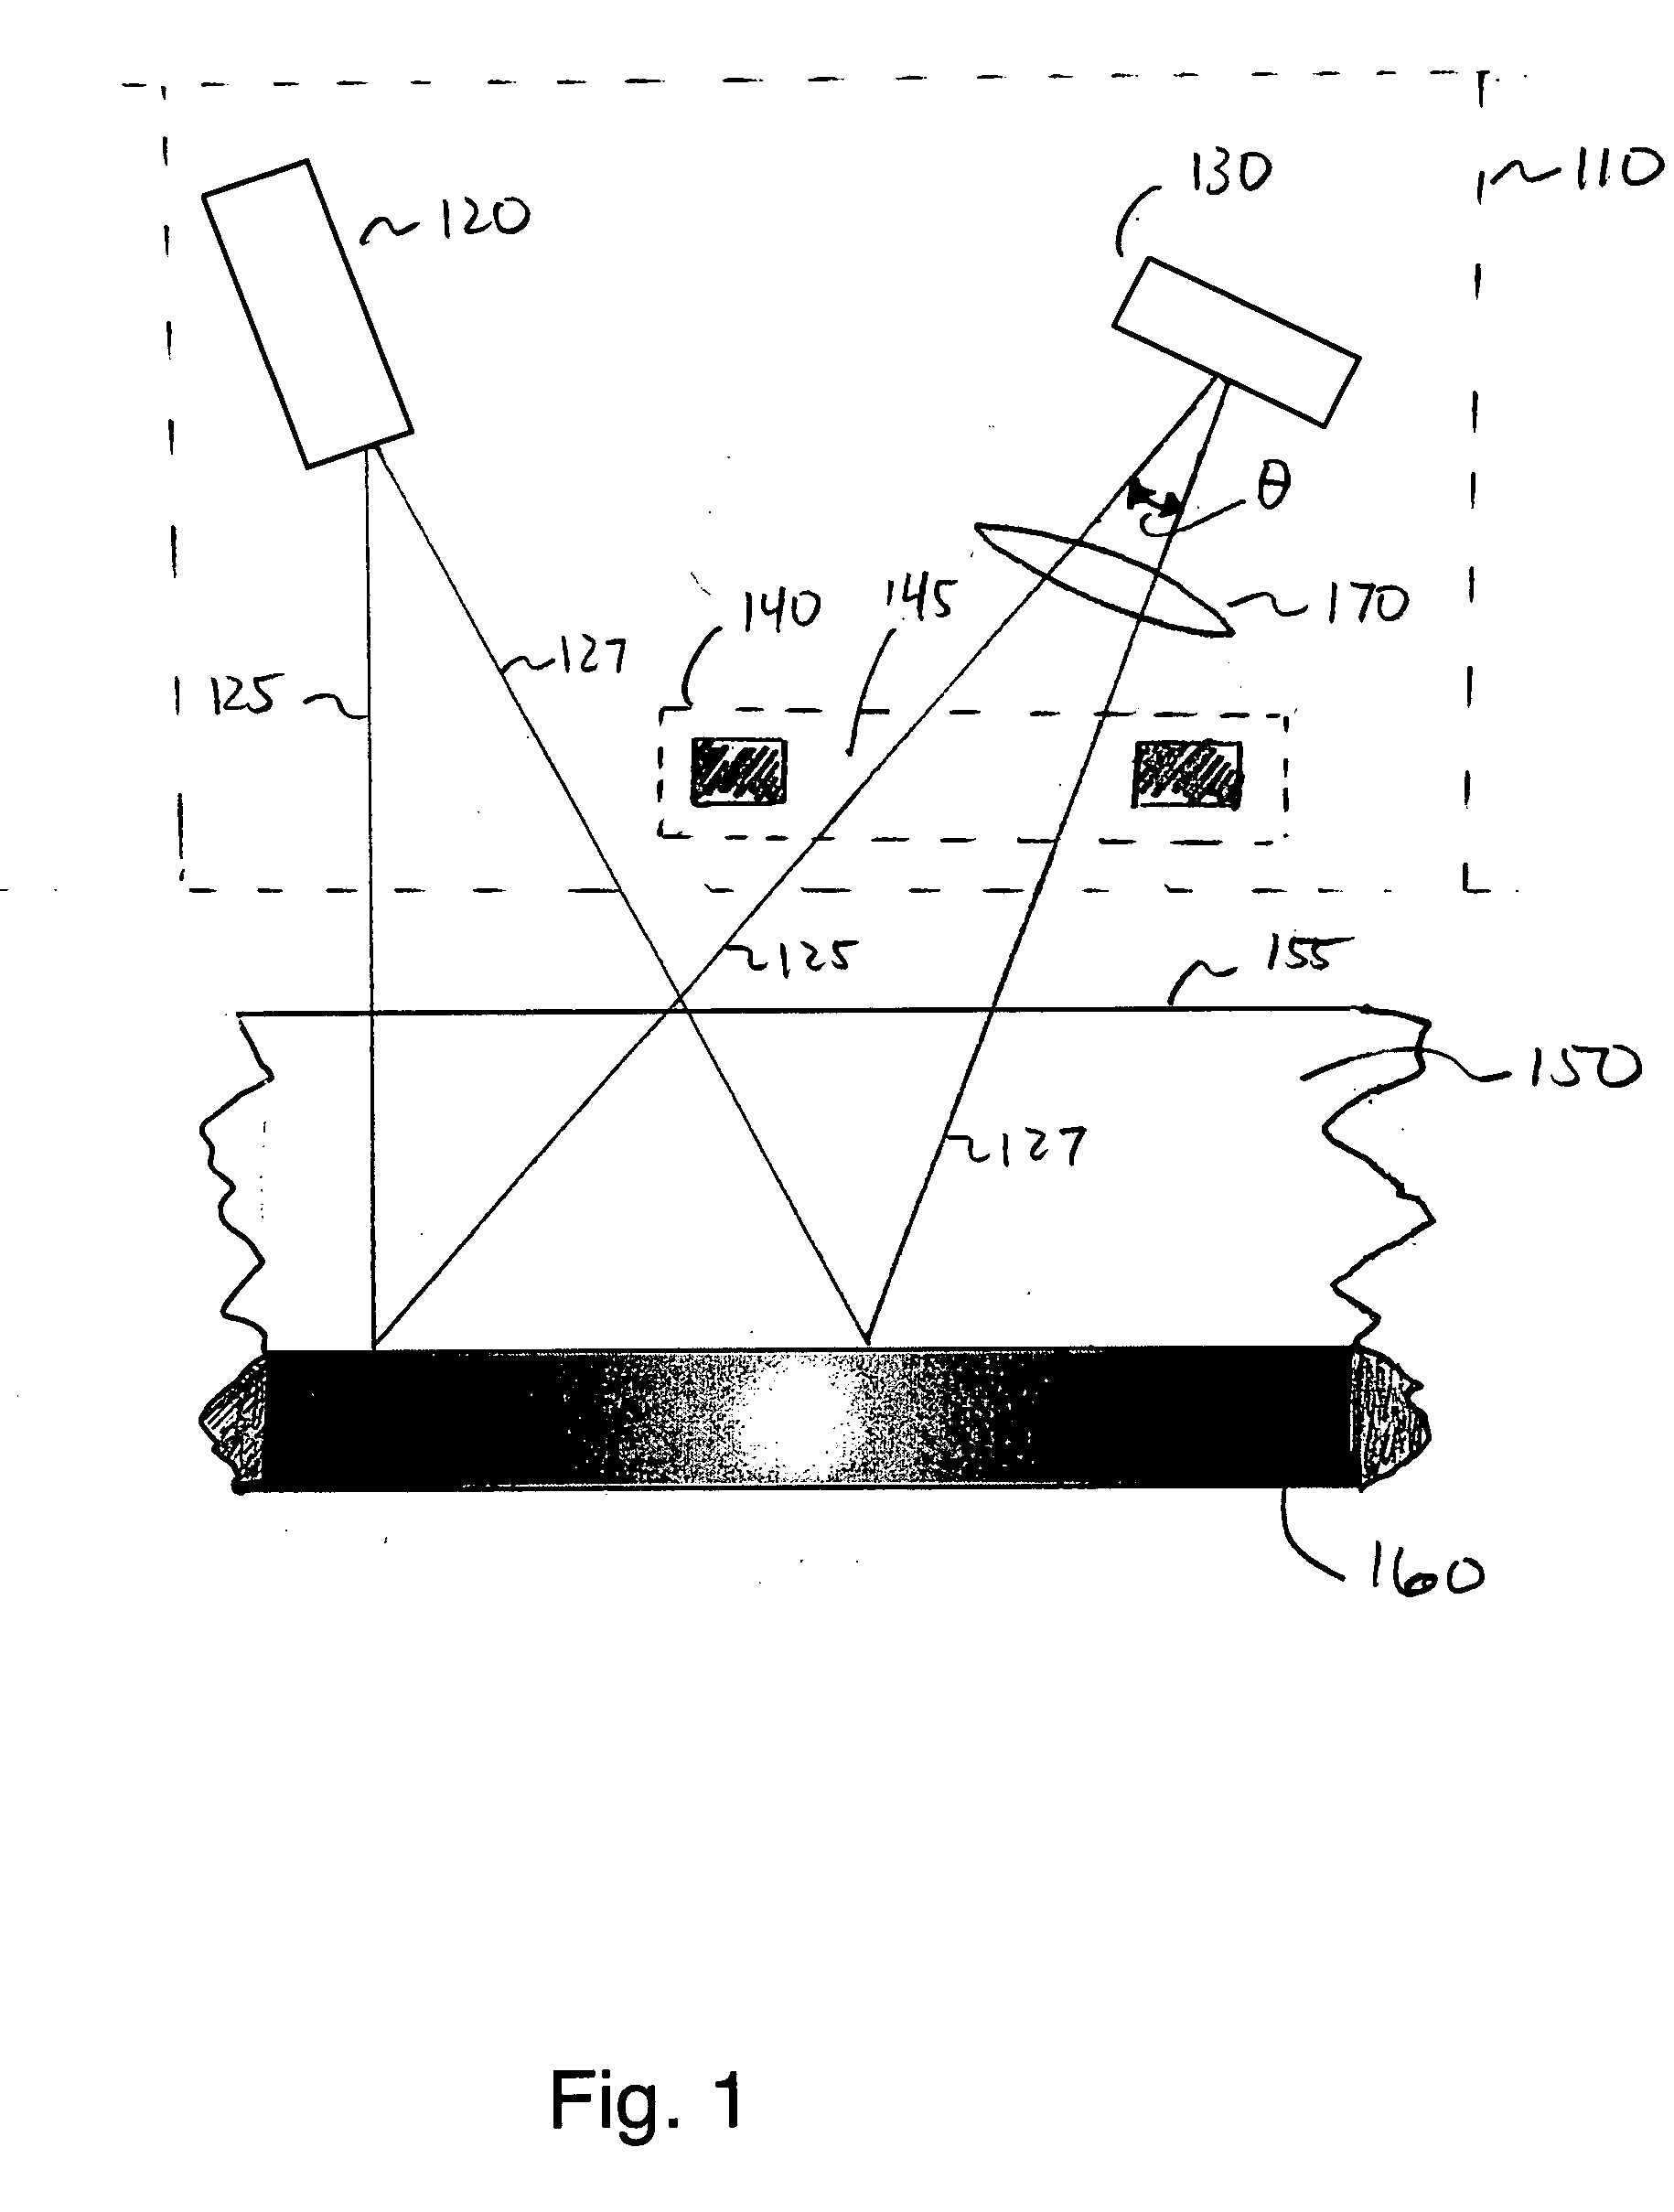 System and method for an optical navigation device configured to generate navigation information through an optically transparent layer and to have skating functionality